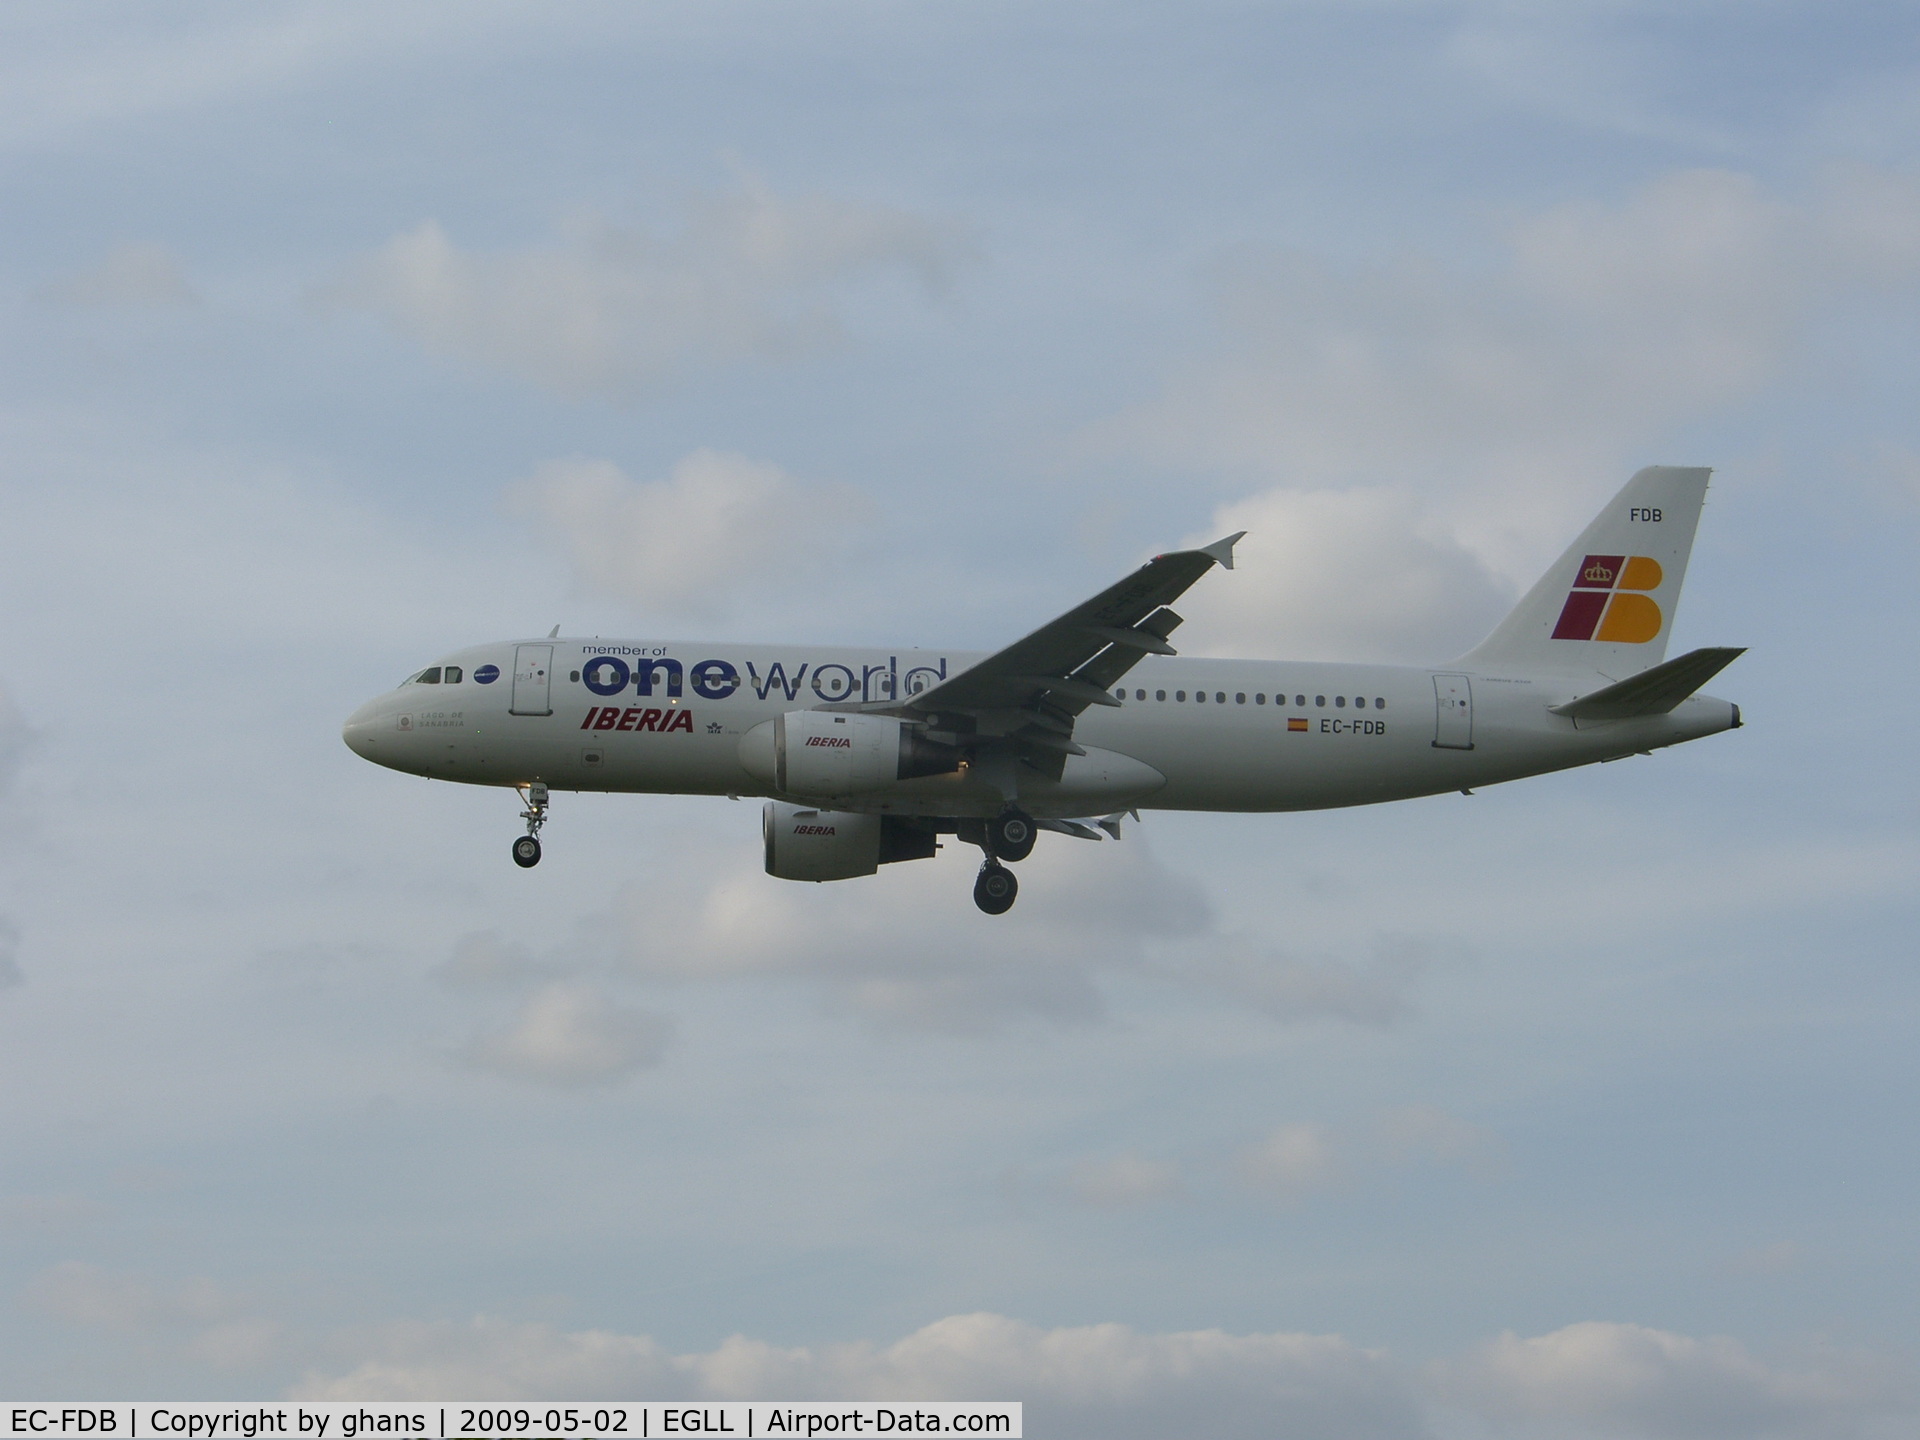 EC-FDB, 1991 Airbus A320-211 C/N 173, Member of the One World family